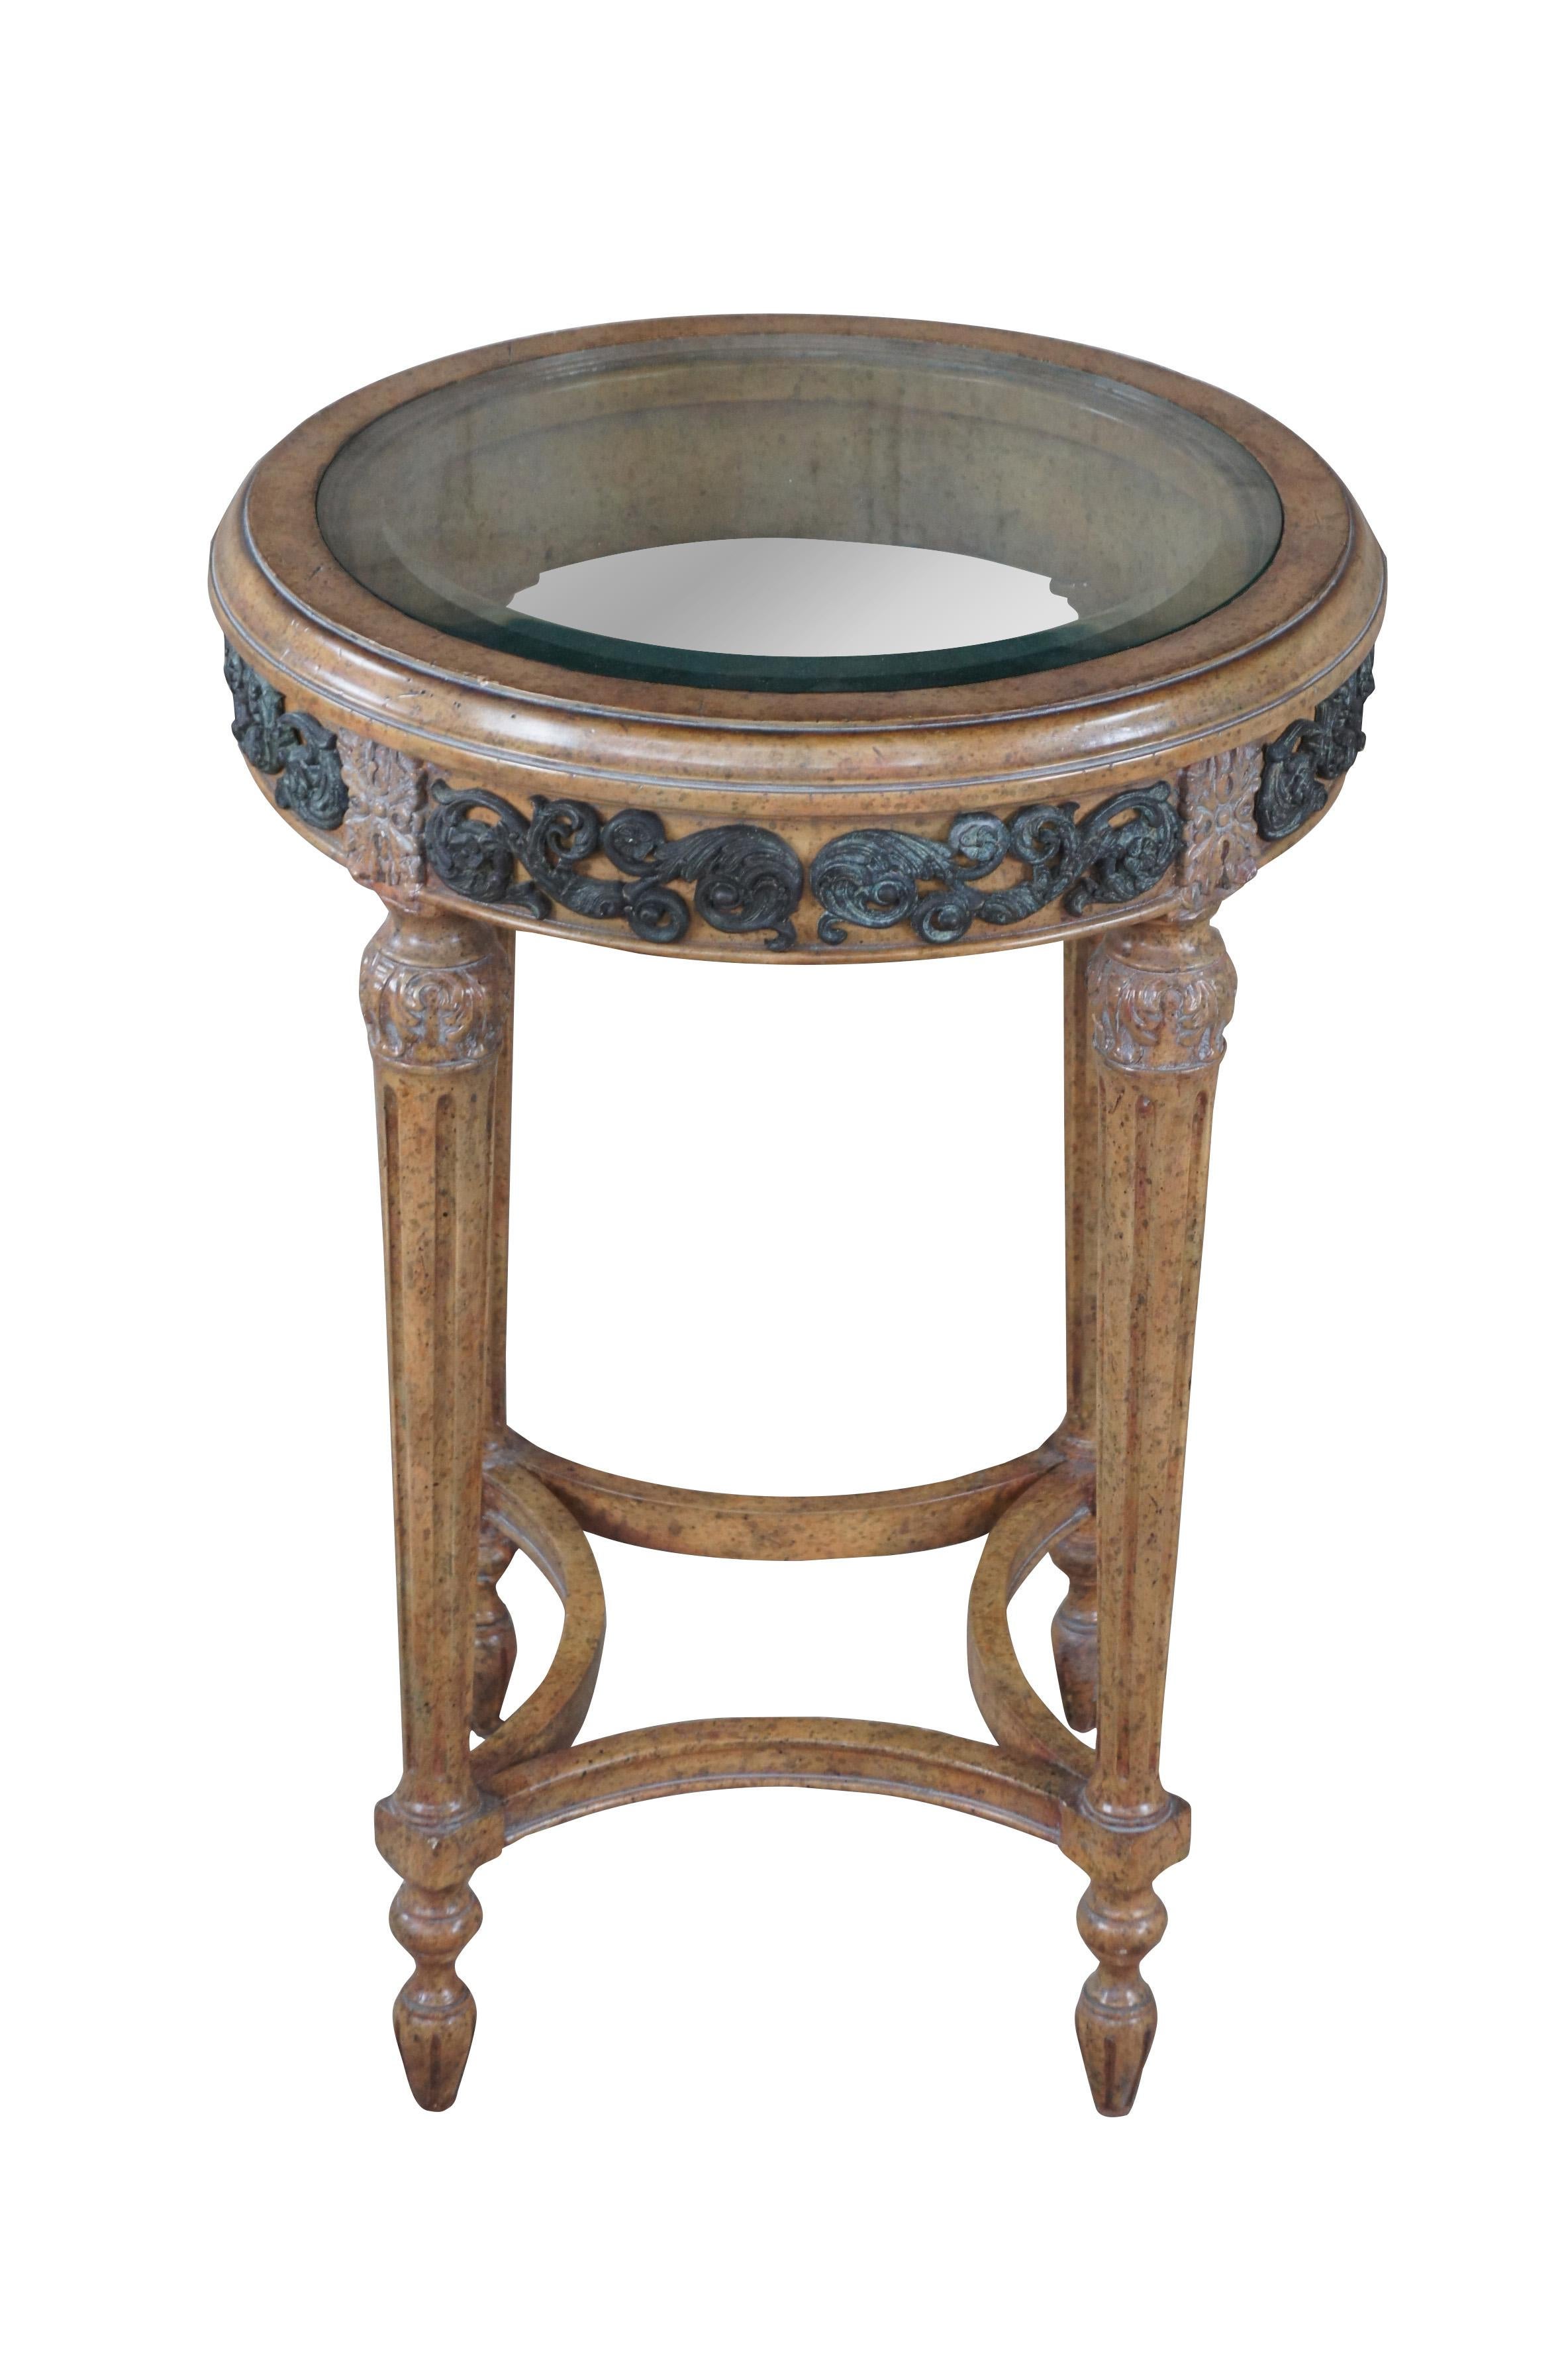 Vintage Maitland Smith French Louis XVI style Gueridon / martini side table.  Made of walnut featuring round form with beveled glass top, floral and acanthus accents, and tapared and fluted legs.

Dimensions:
18